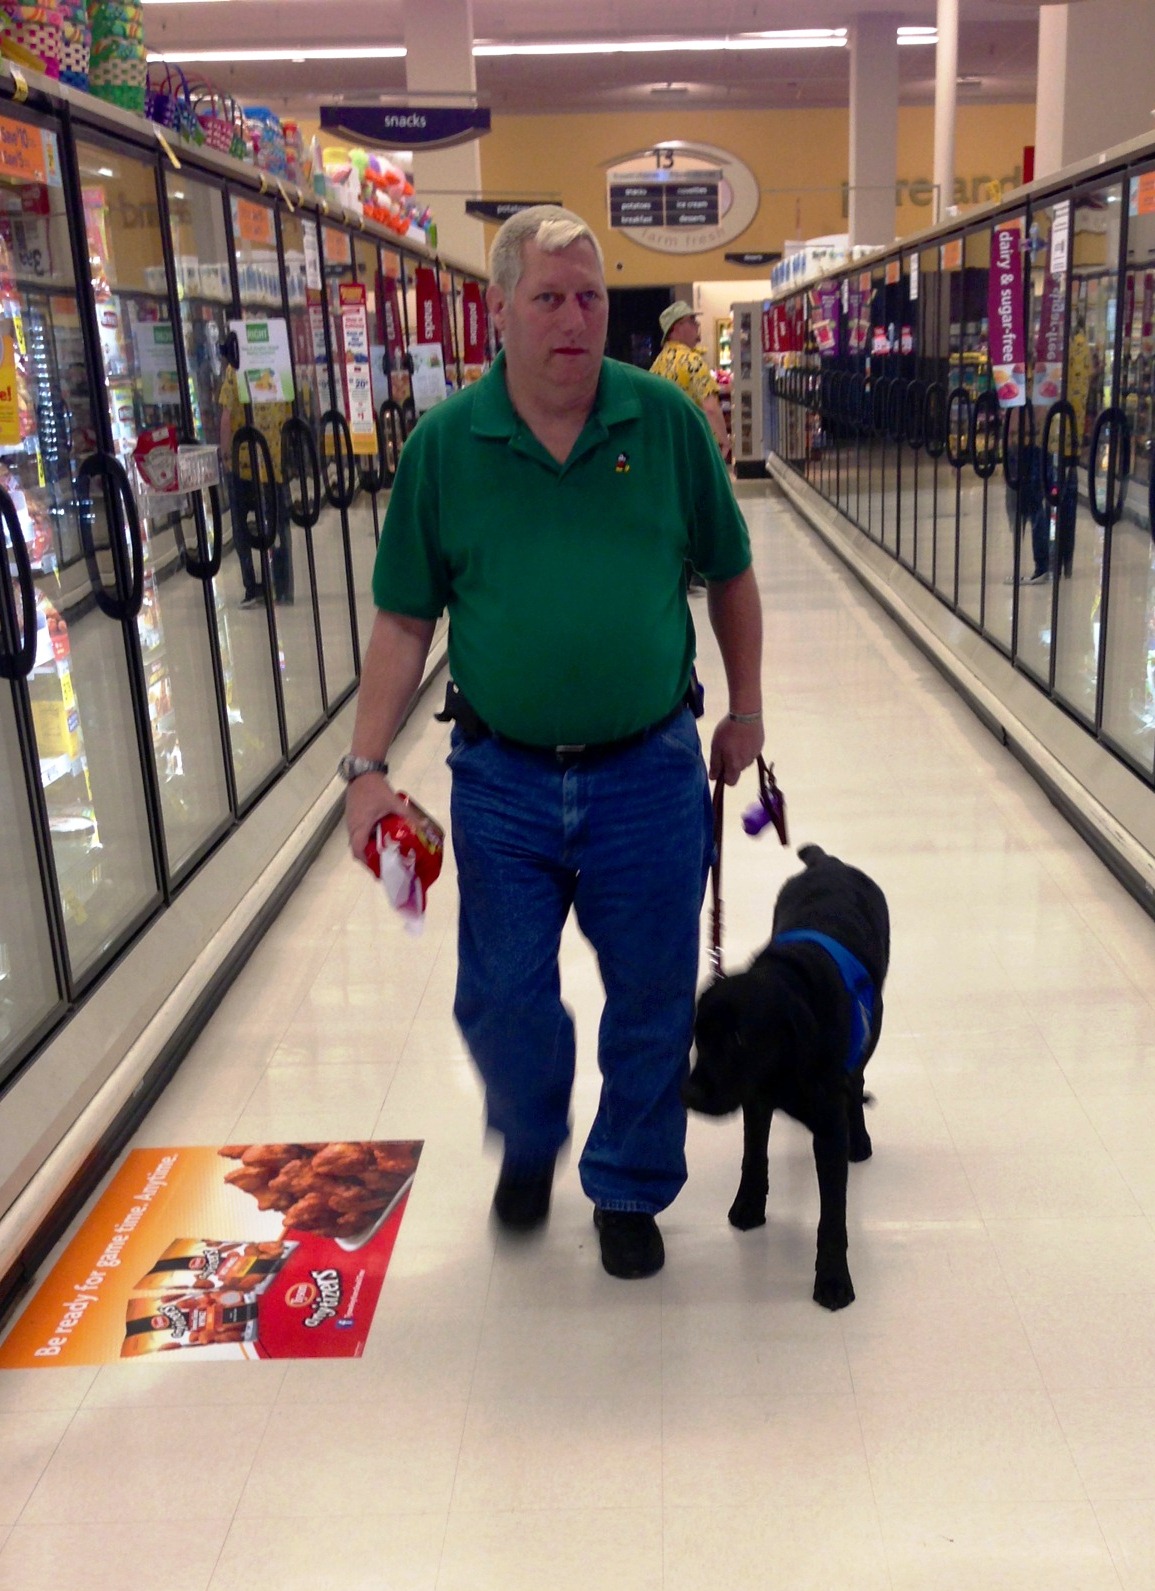 The service dog is walking along with Dennis while shopping at Safeway.